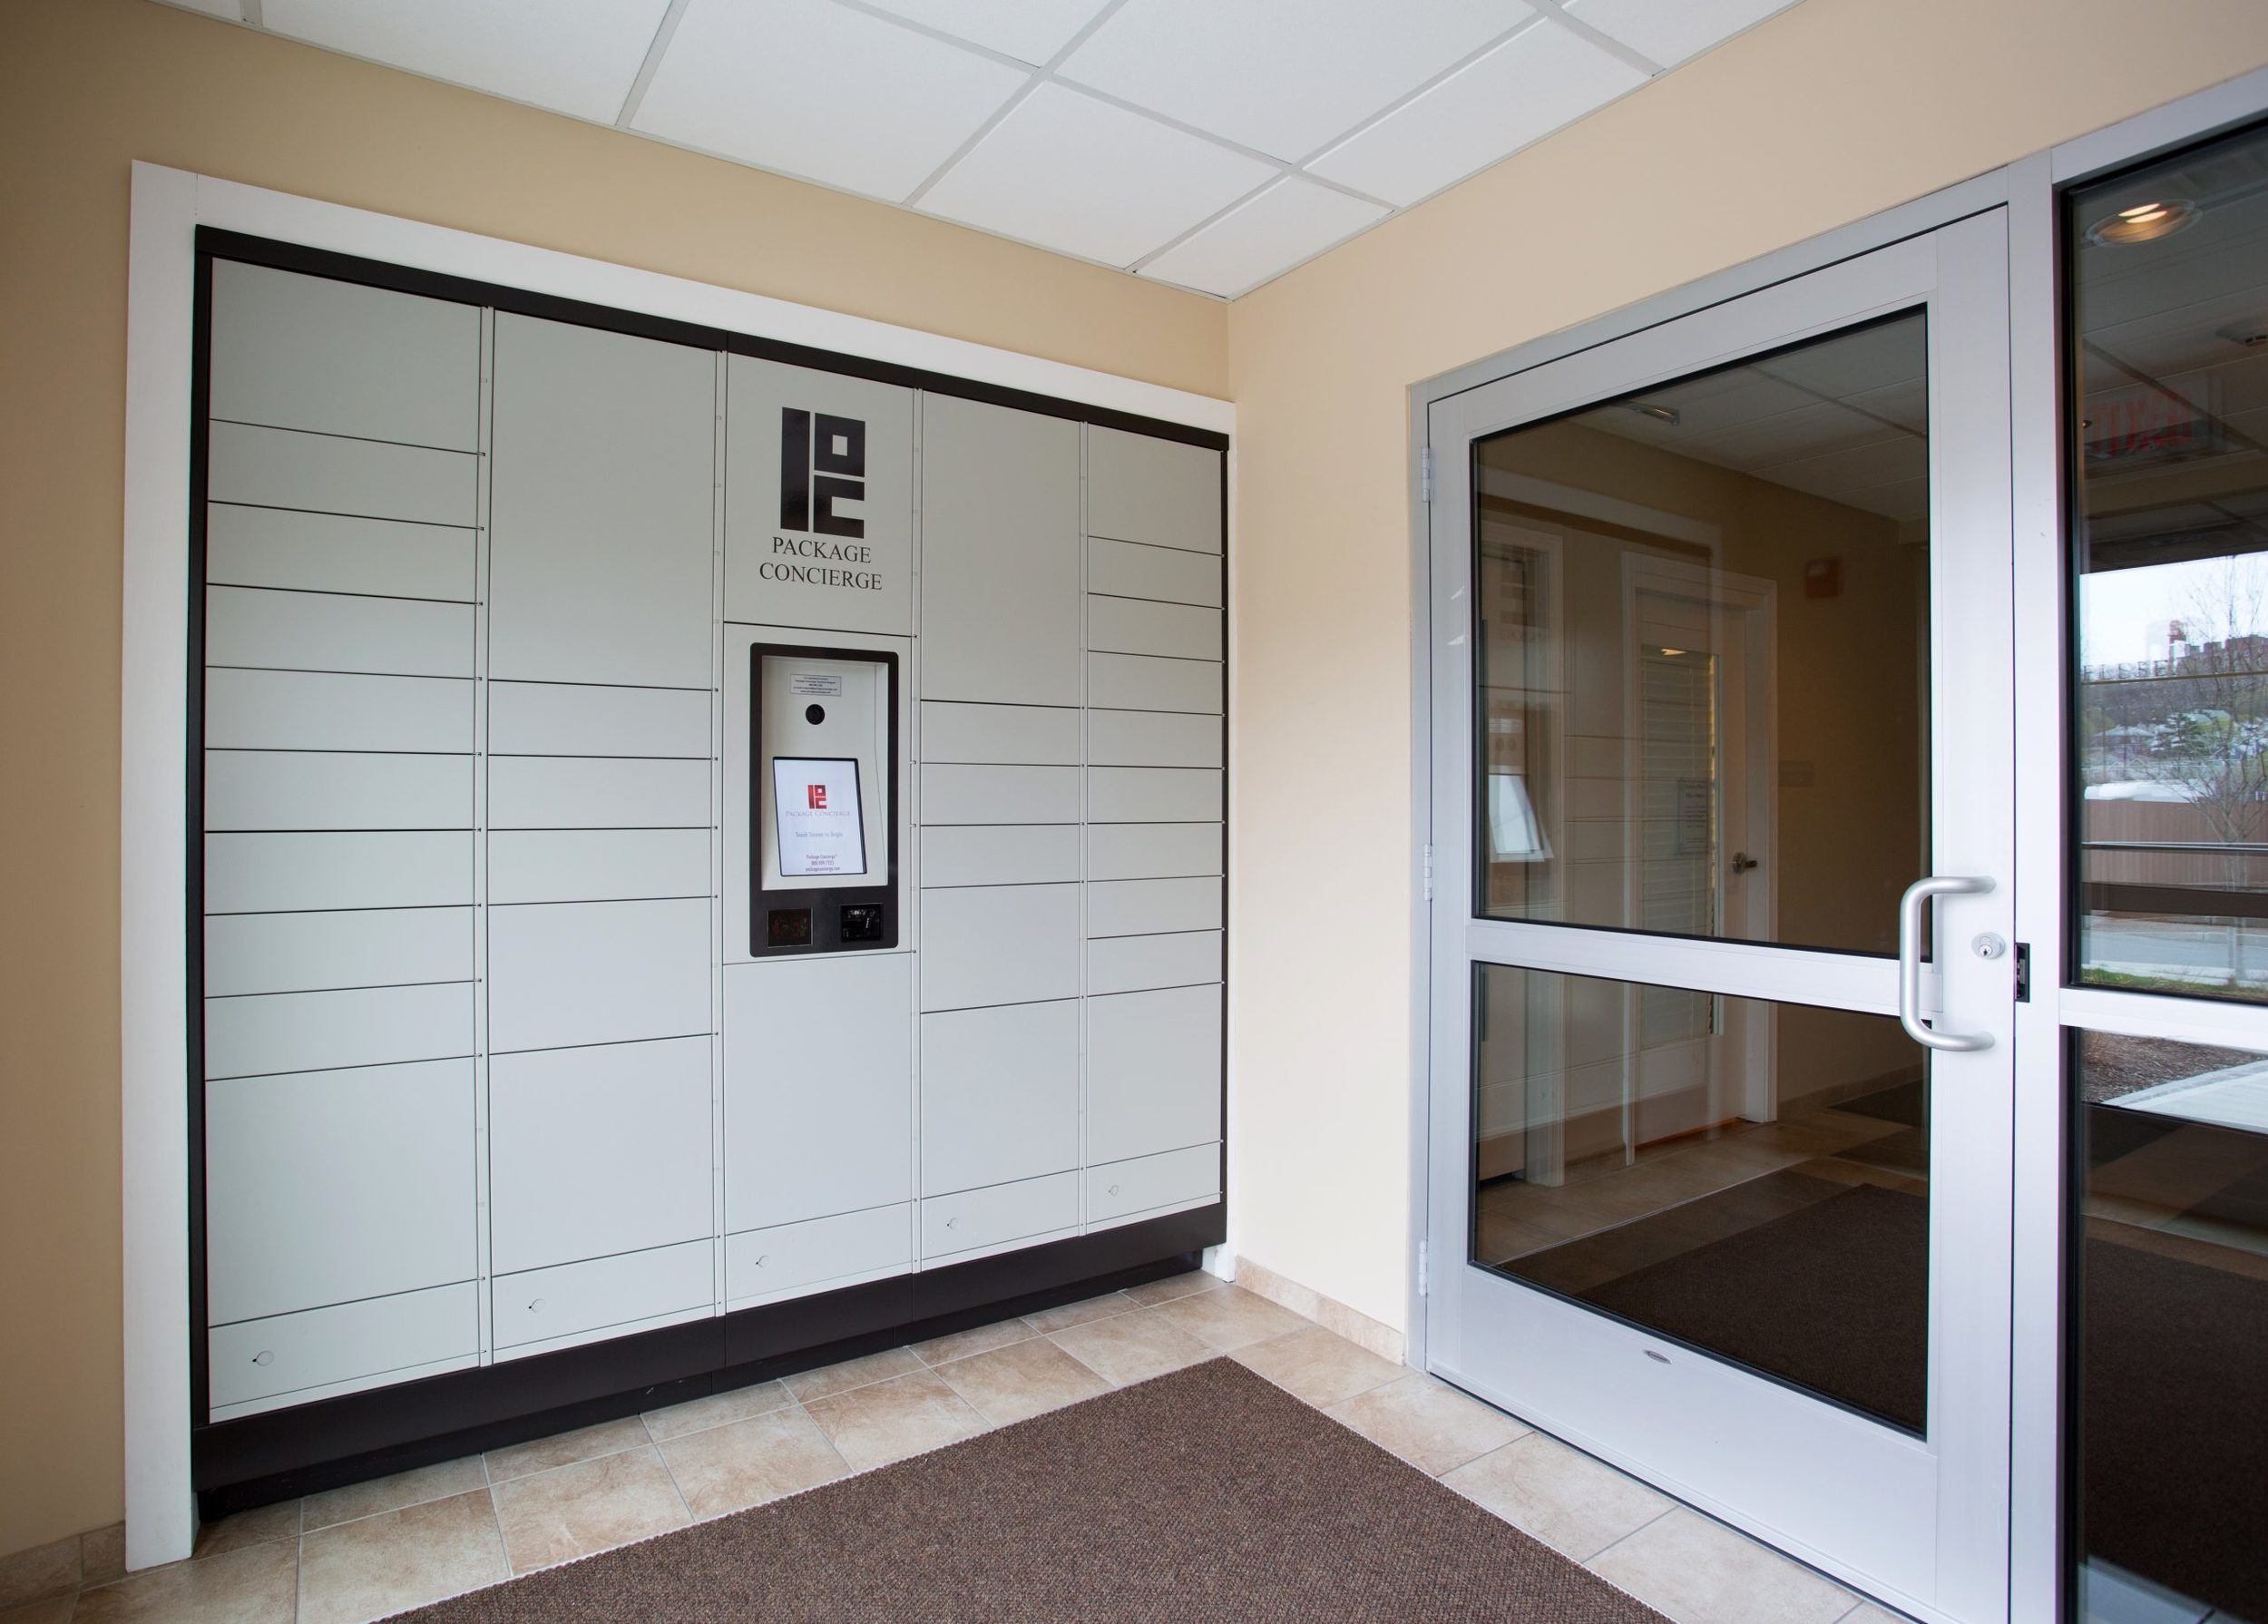 A Package Concierge® smart automated locker system installed in grey in a Chelsea Place apartment complex in Boston, MA